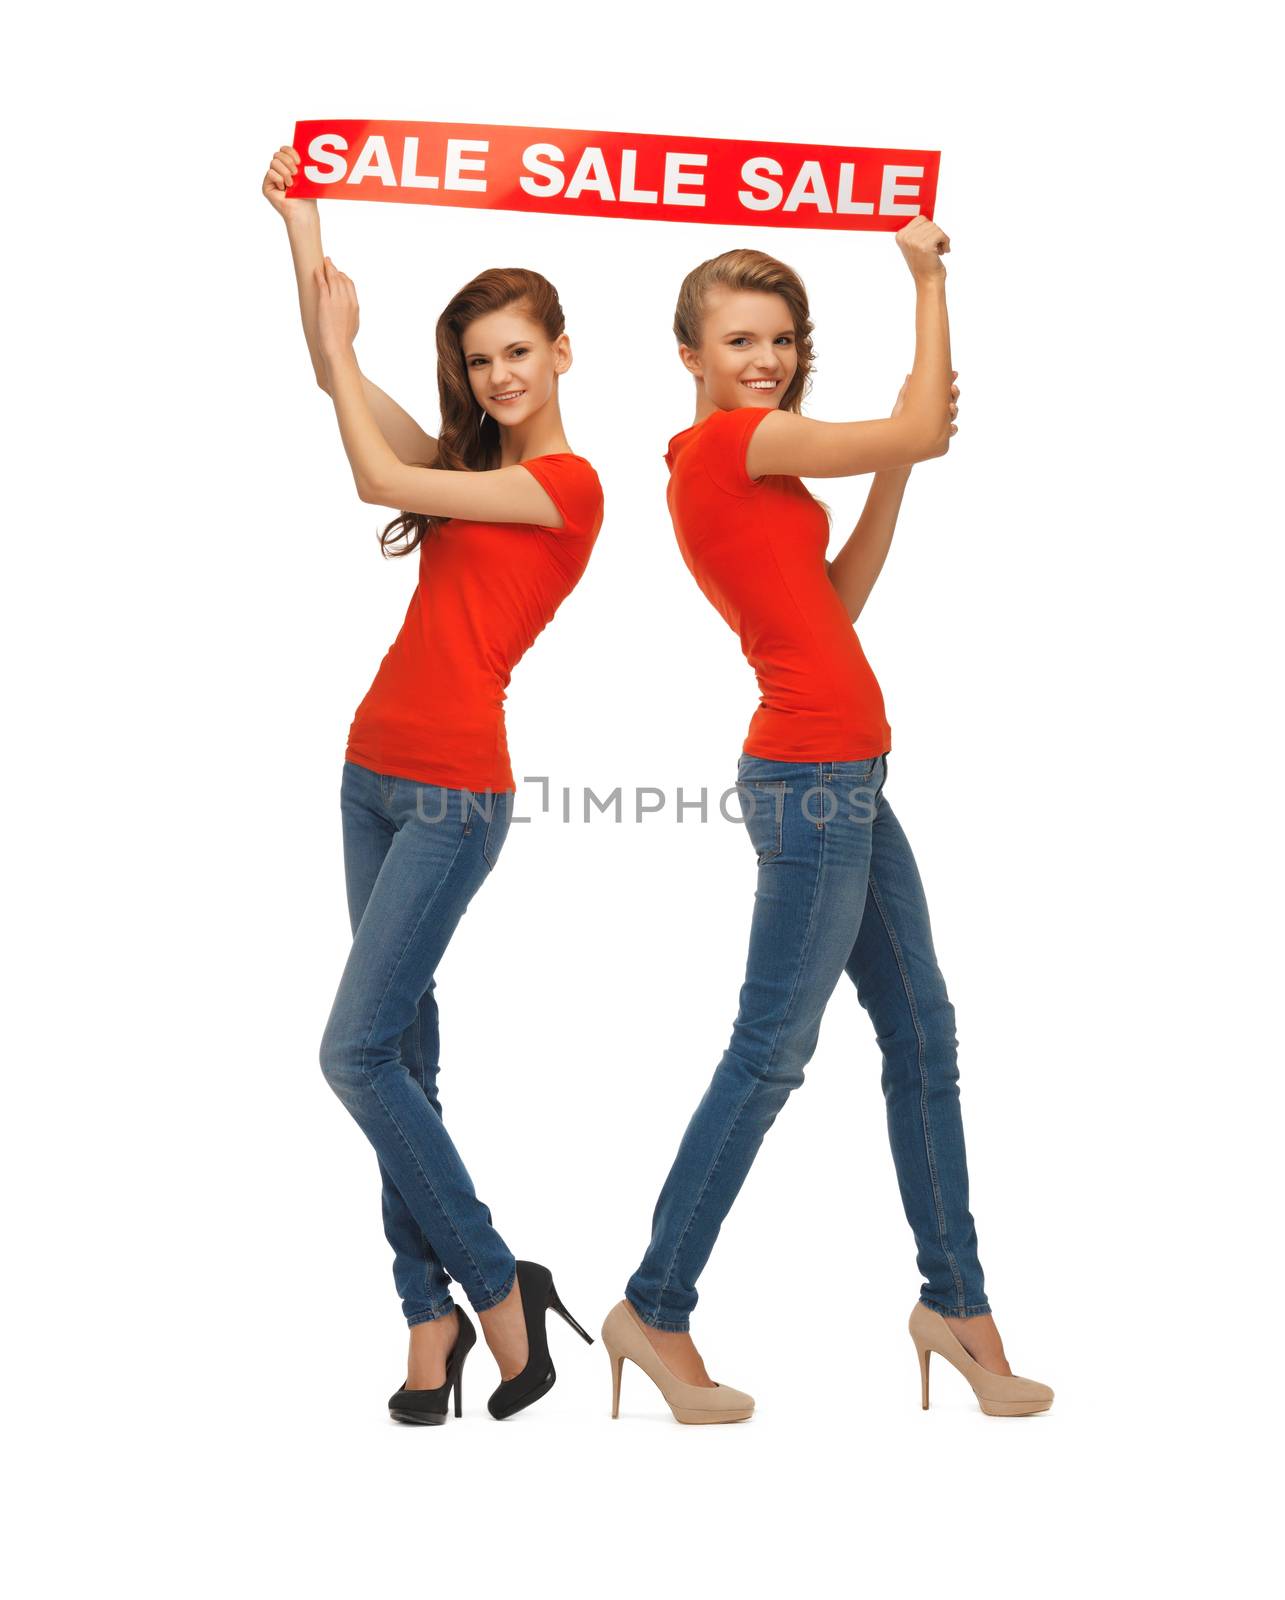 two teenage girls with sale sign by dolgachov